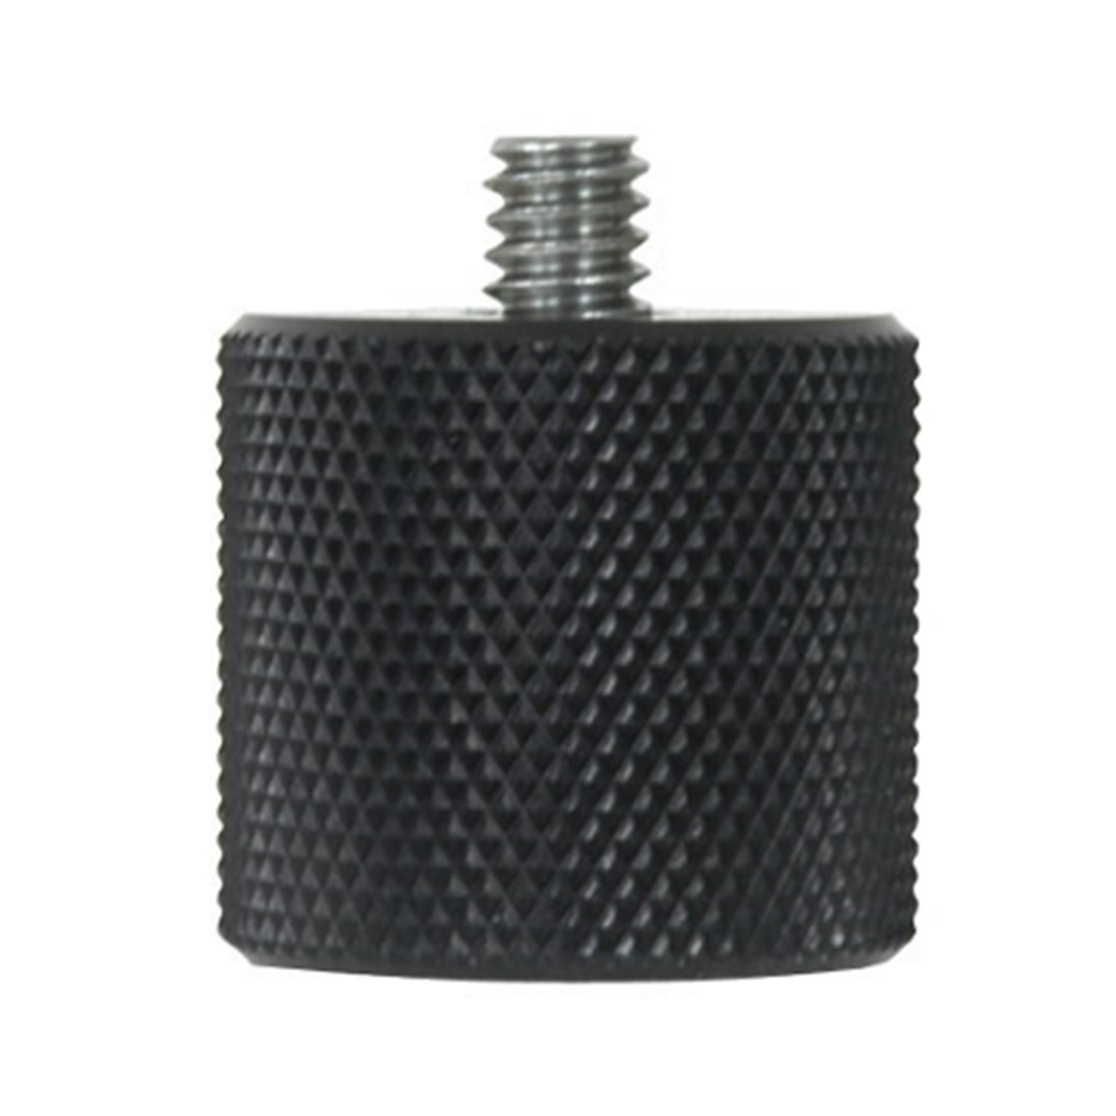 SECO 5/8" Female to 1/4" Male Thread Adapter